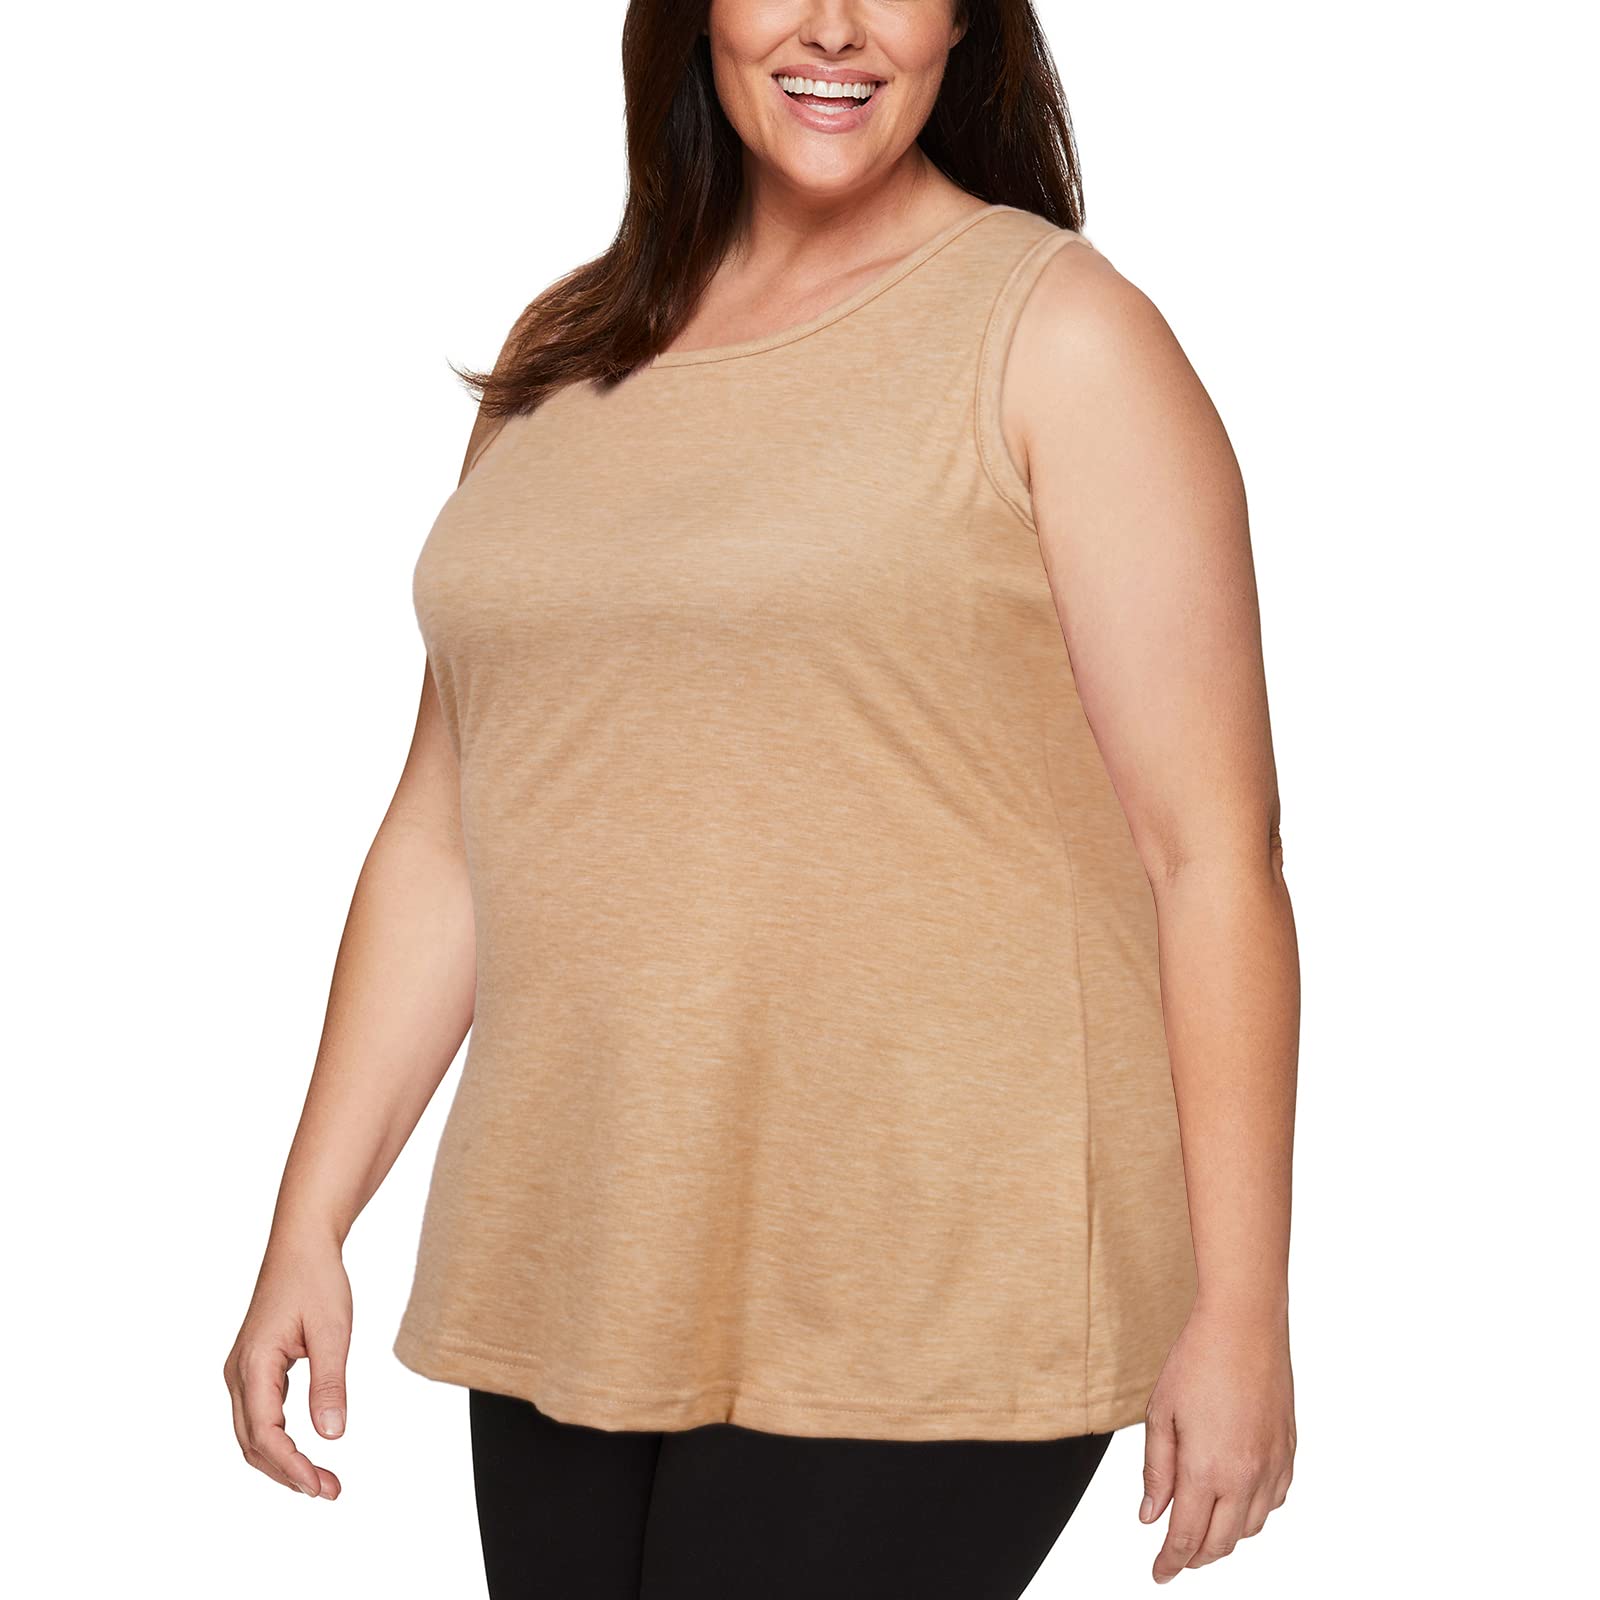 Plus Size Tank Tops for Women Summer Sleeveless T-Shirts Loose-Beige - Moon Wood